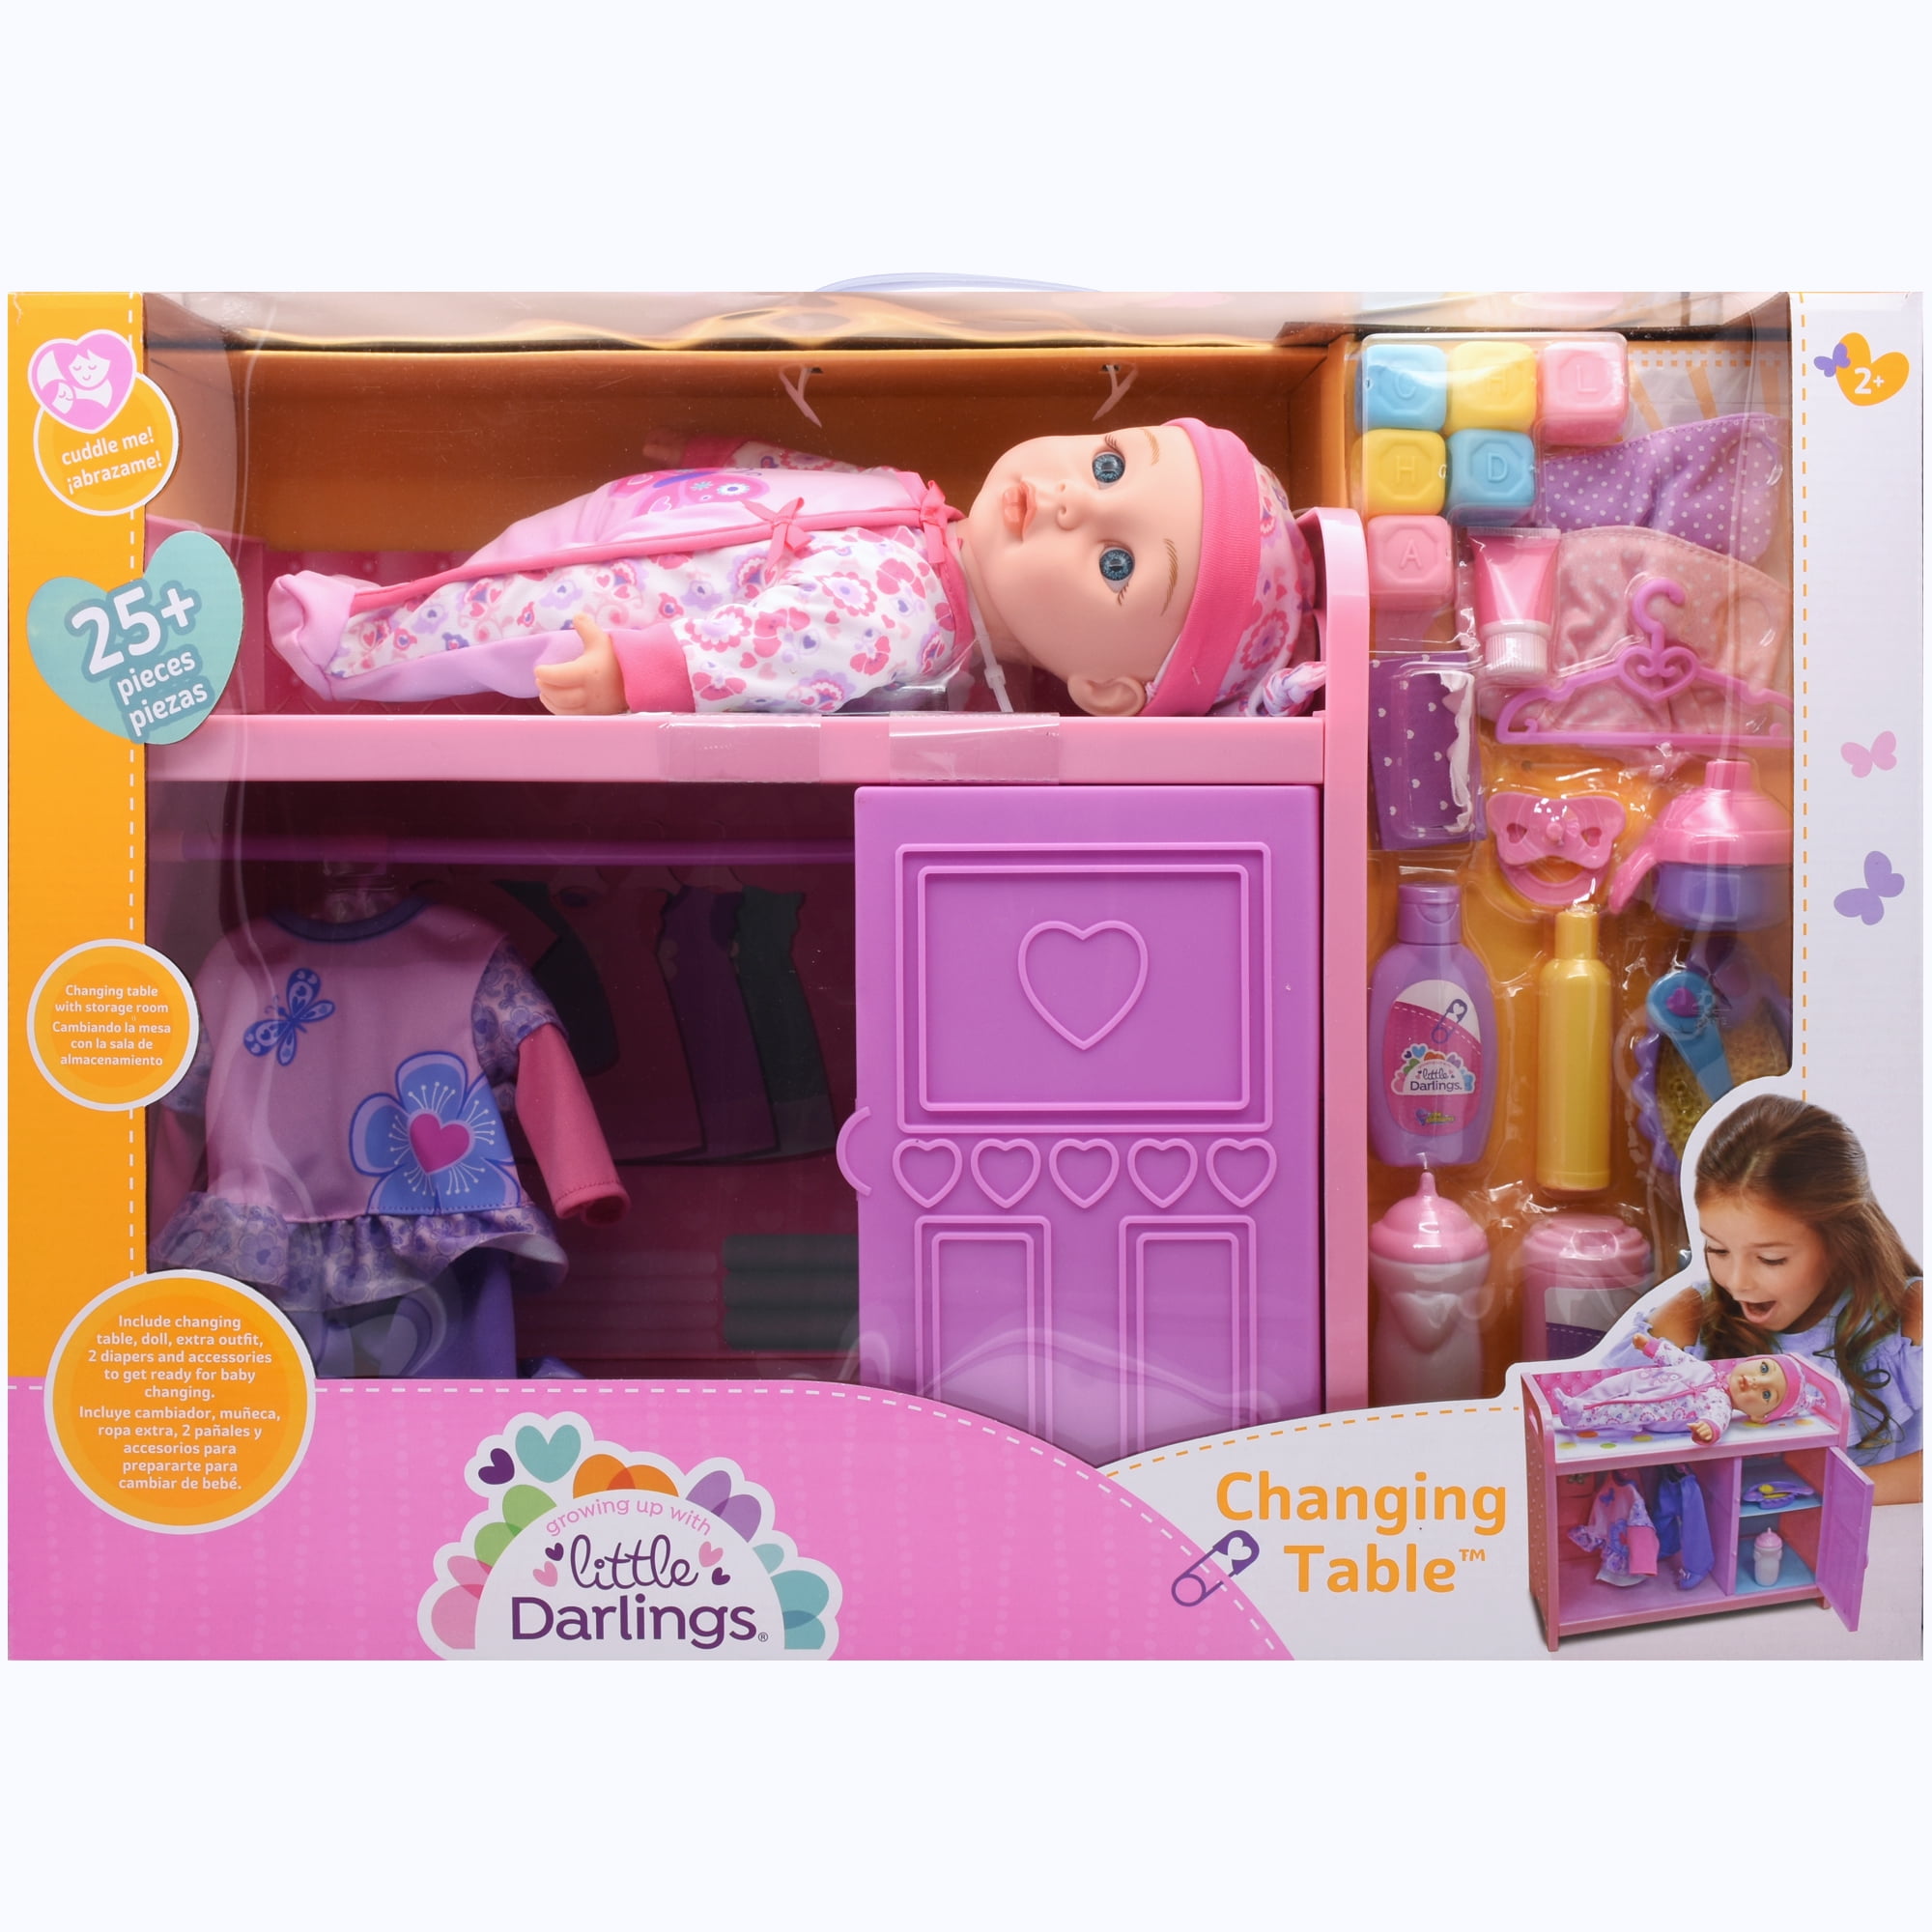 Little Darlings Toy Baby Doll, Baby Doll Bathtub And Changing Table